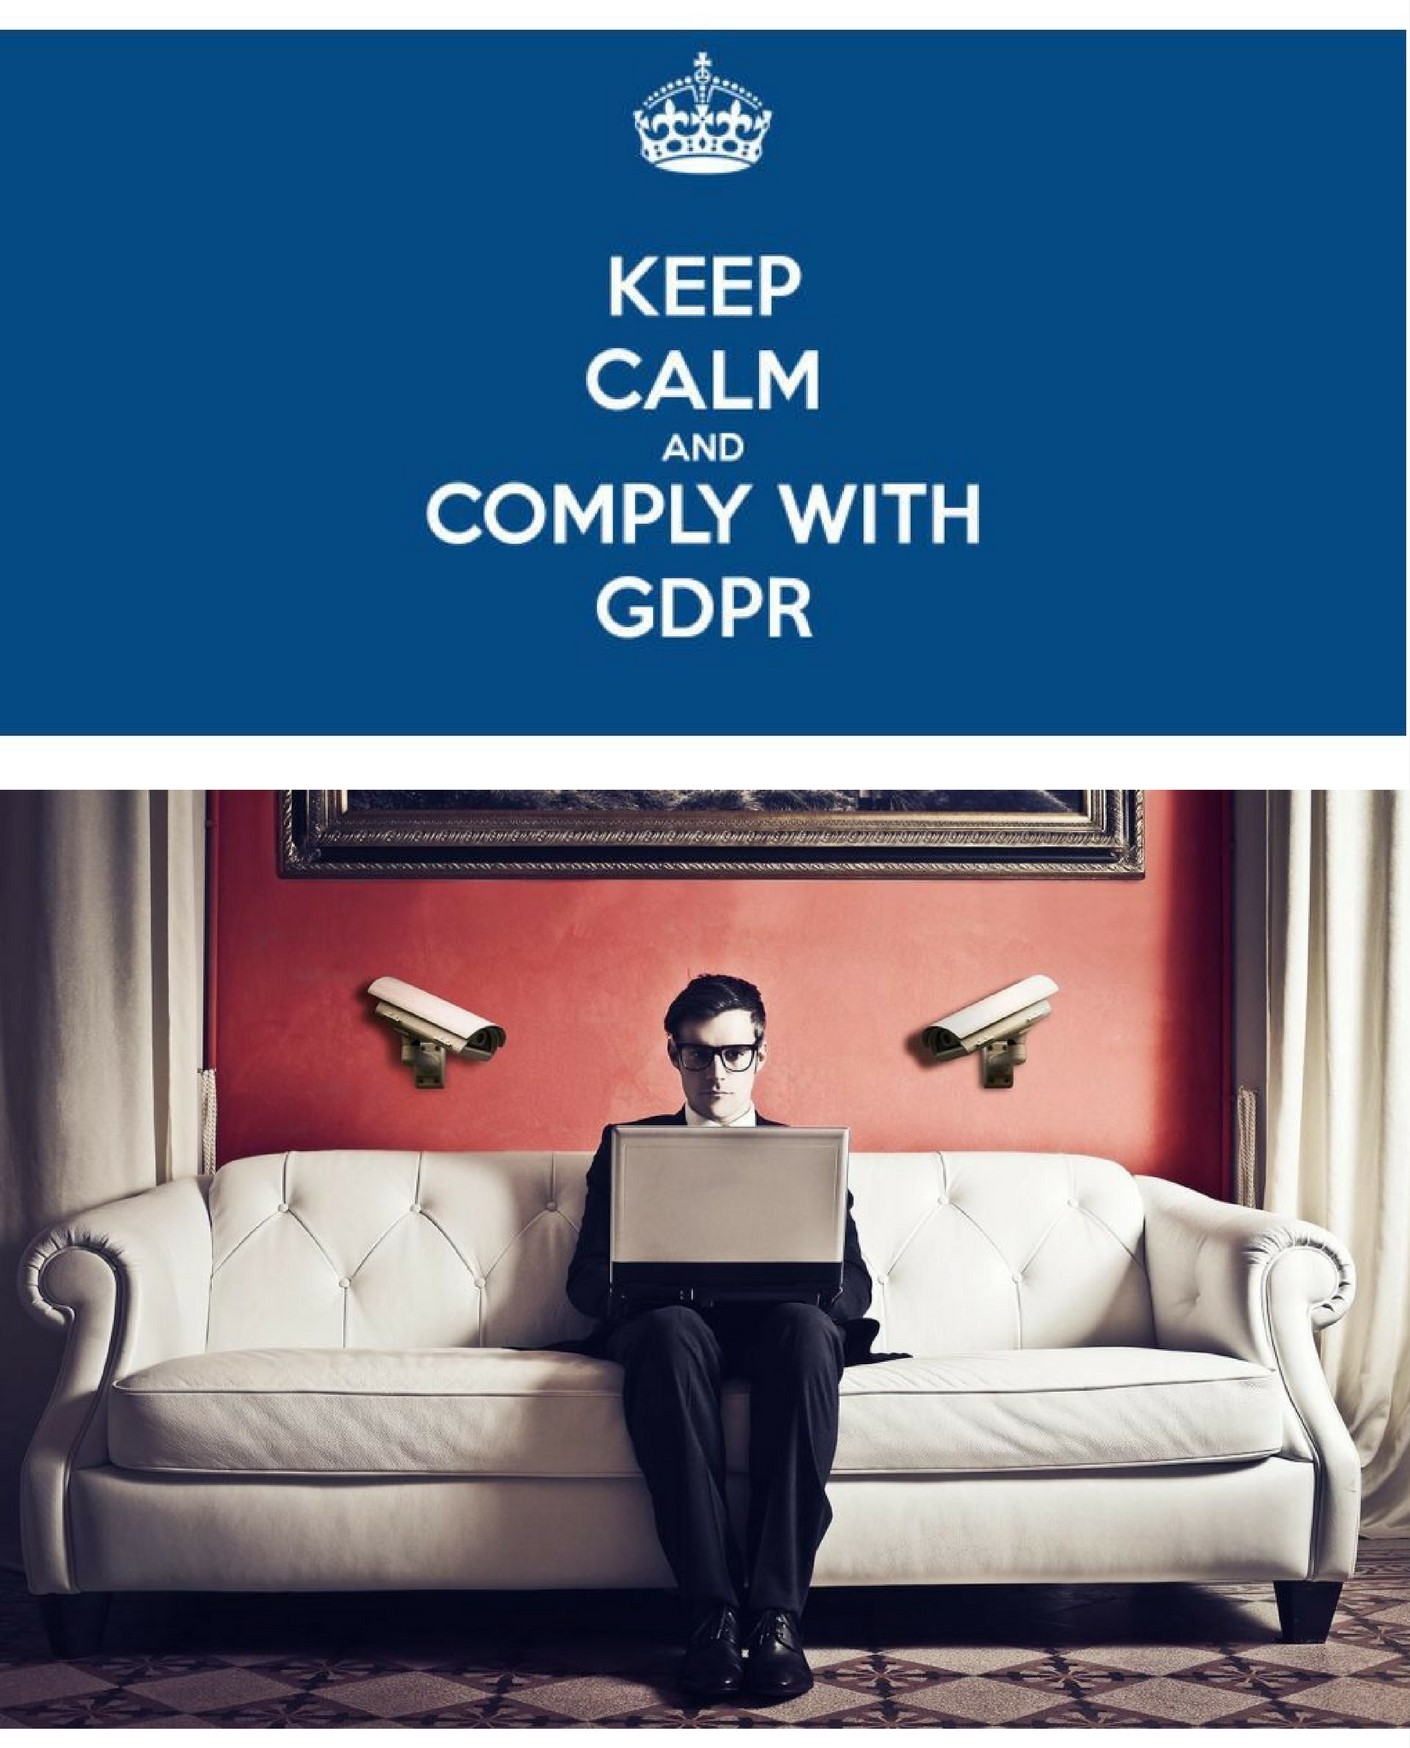 comply-with-GDPRjpg